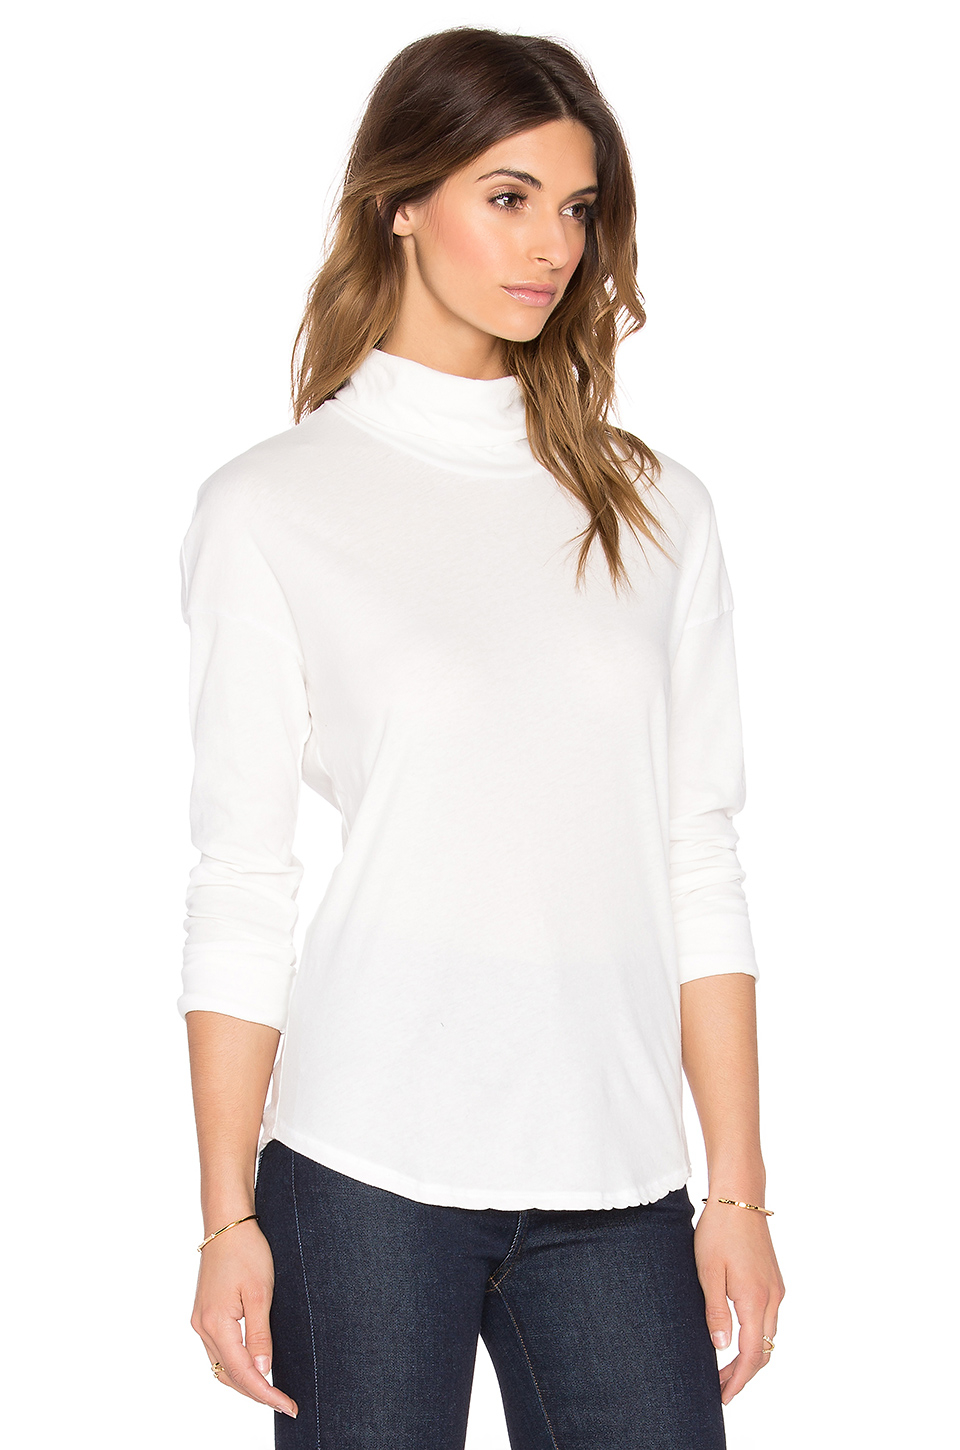 Lyst - James Perse Relaxed Curve Hem Turtleneck in White